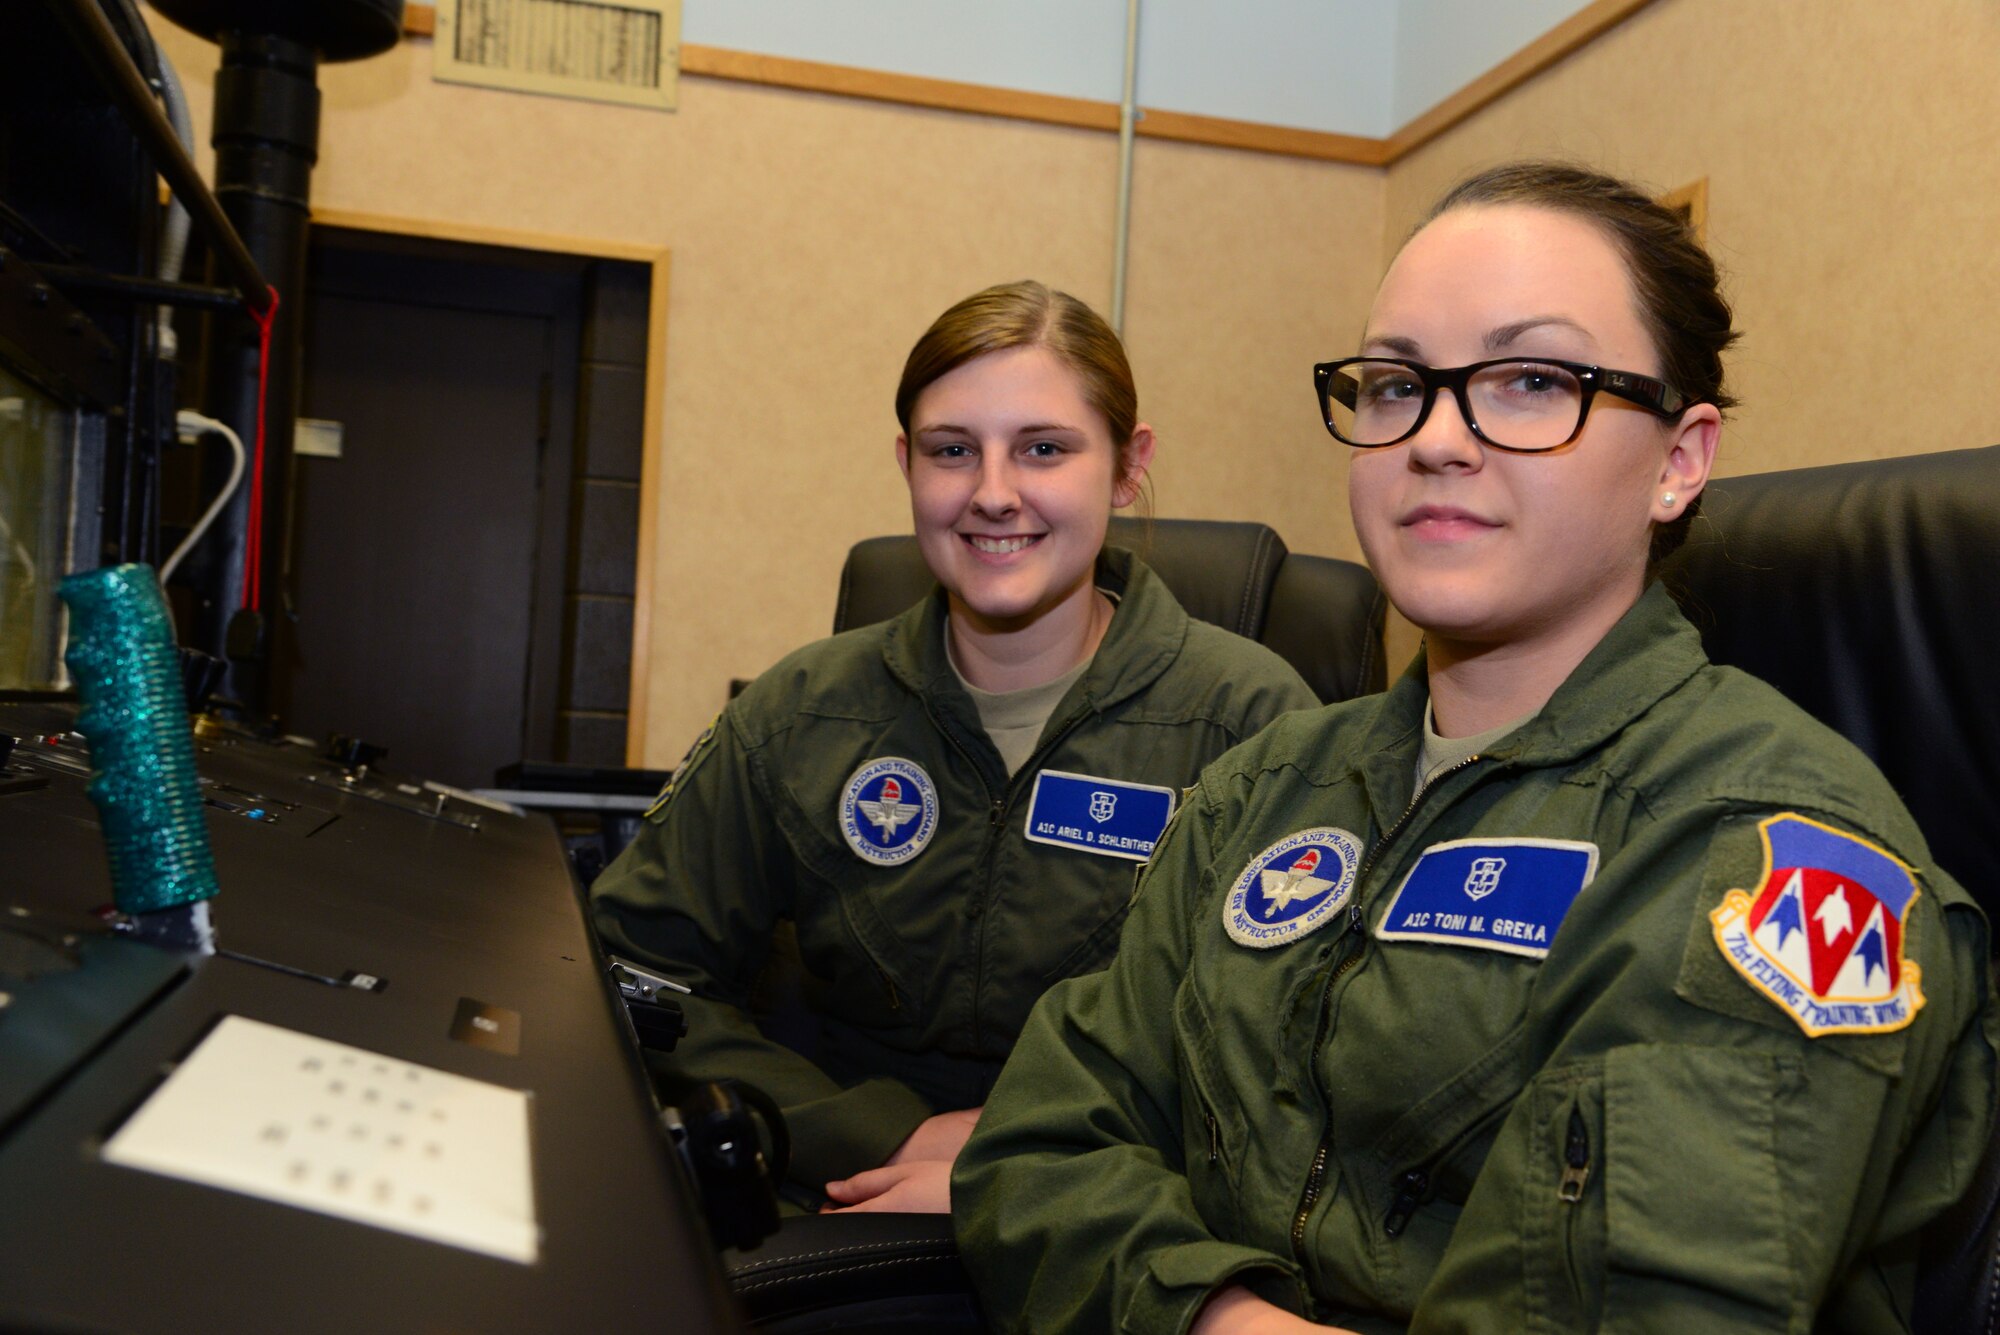 VANCE AIR FORCE BASE, Okla. -- Airmen 1st Class Toni Greka, front, and Ariel Schlenther, rear, both 71st Medical Operations Group aerospace physiology technicians, sit at the controls of a hypobaric chamber here. Greka and Schlenther were selected for below-the-zone promotion to senior airman March 19. (U.S. Air Force photo/Senior Airman Frank Casciotta)